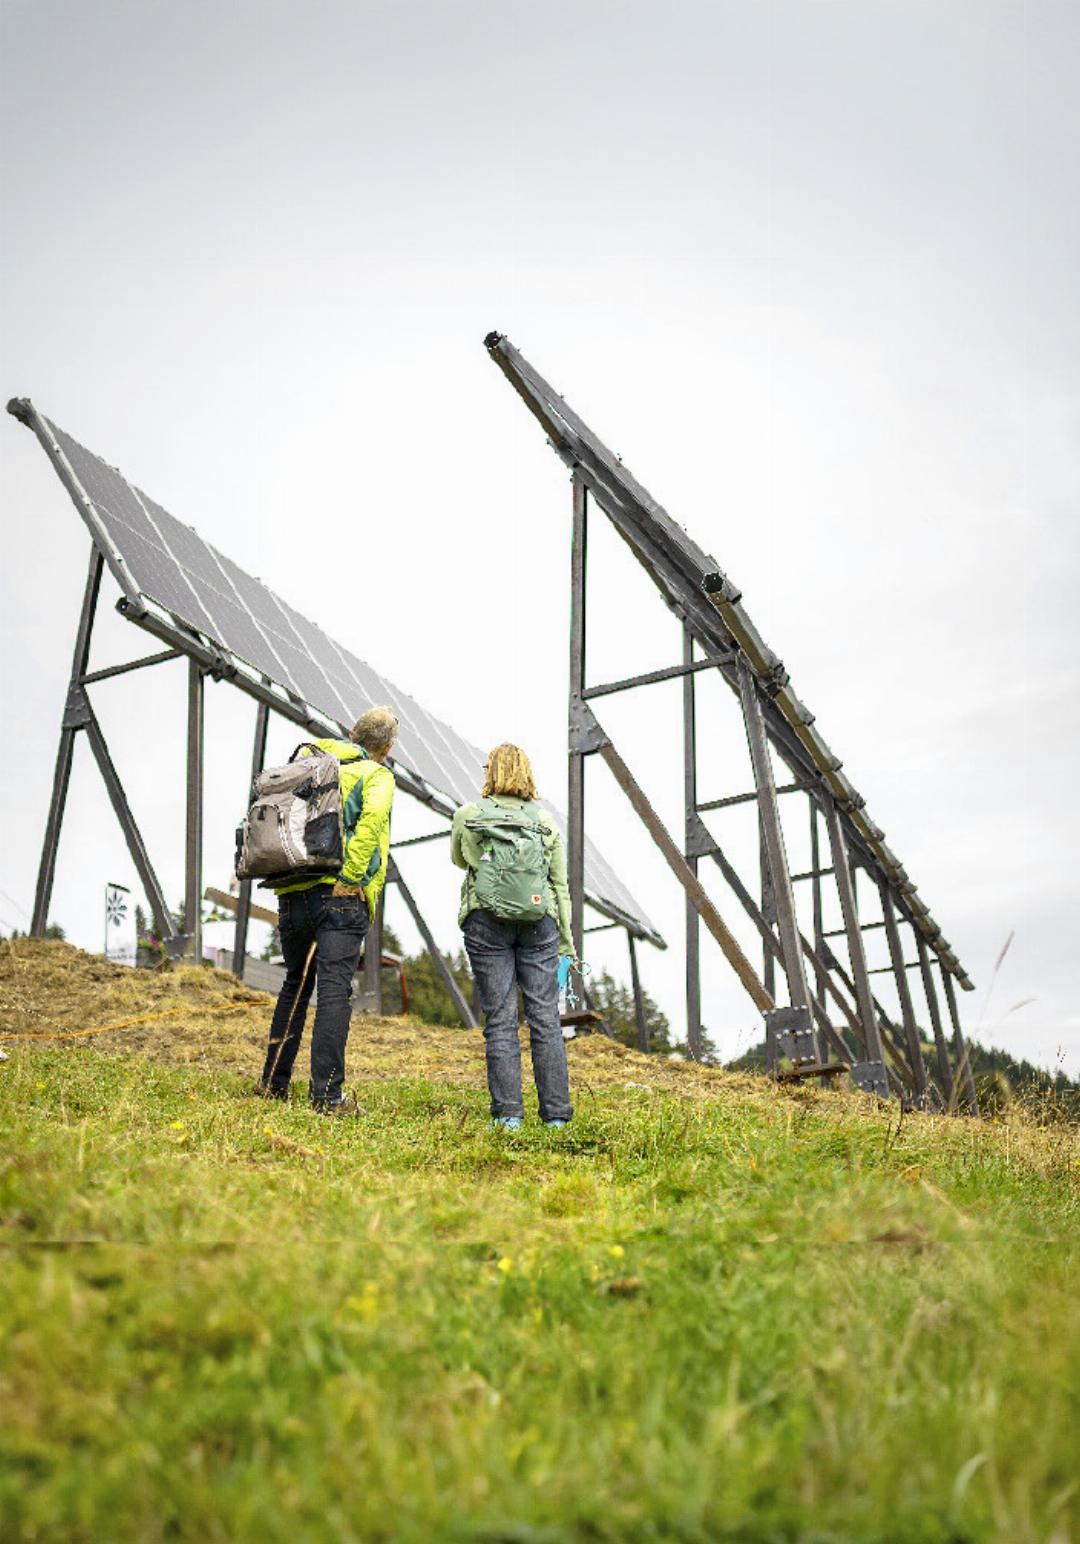 Ney, but mostly Yea Sayers – Press, politicians, and environmentalists were invited to view the test site on Hornberg, 31 August 2023. See more images online.